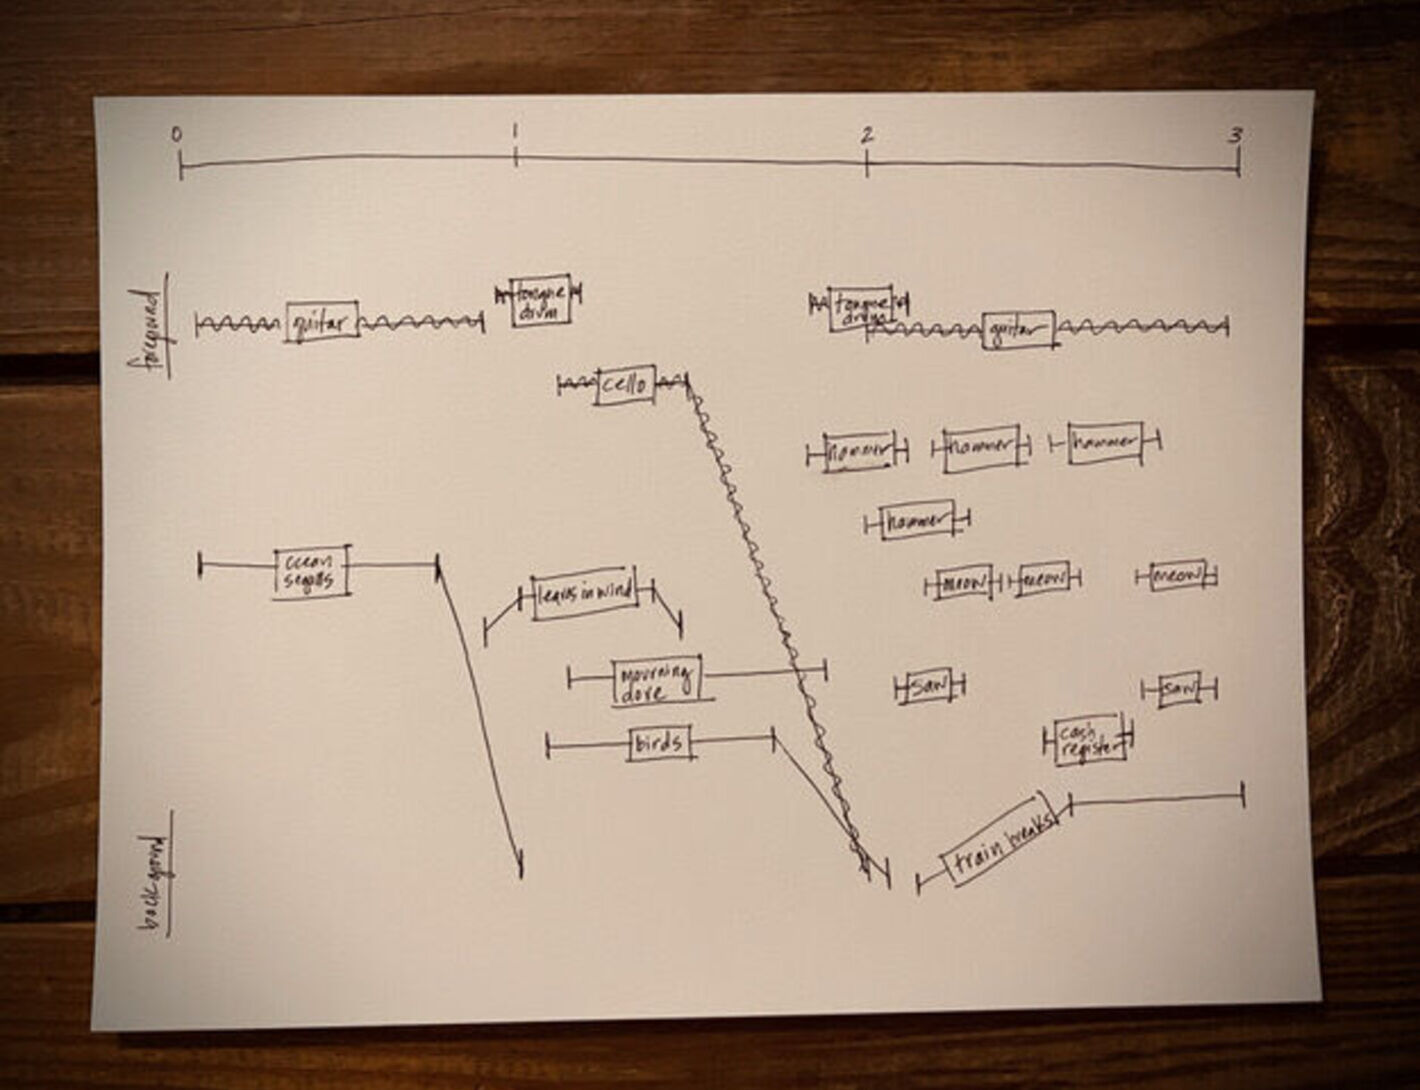 A piece of paper showing how the different layers of sounds become a single track of music